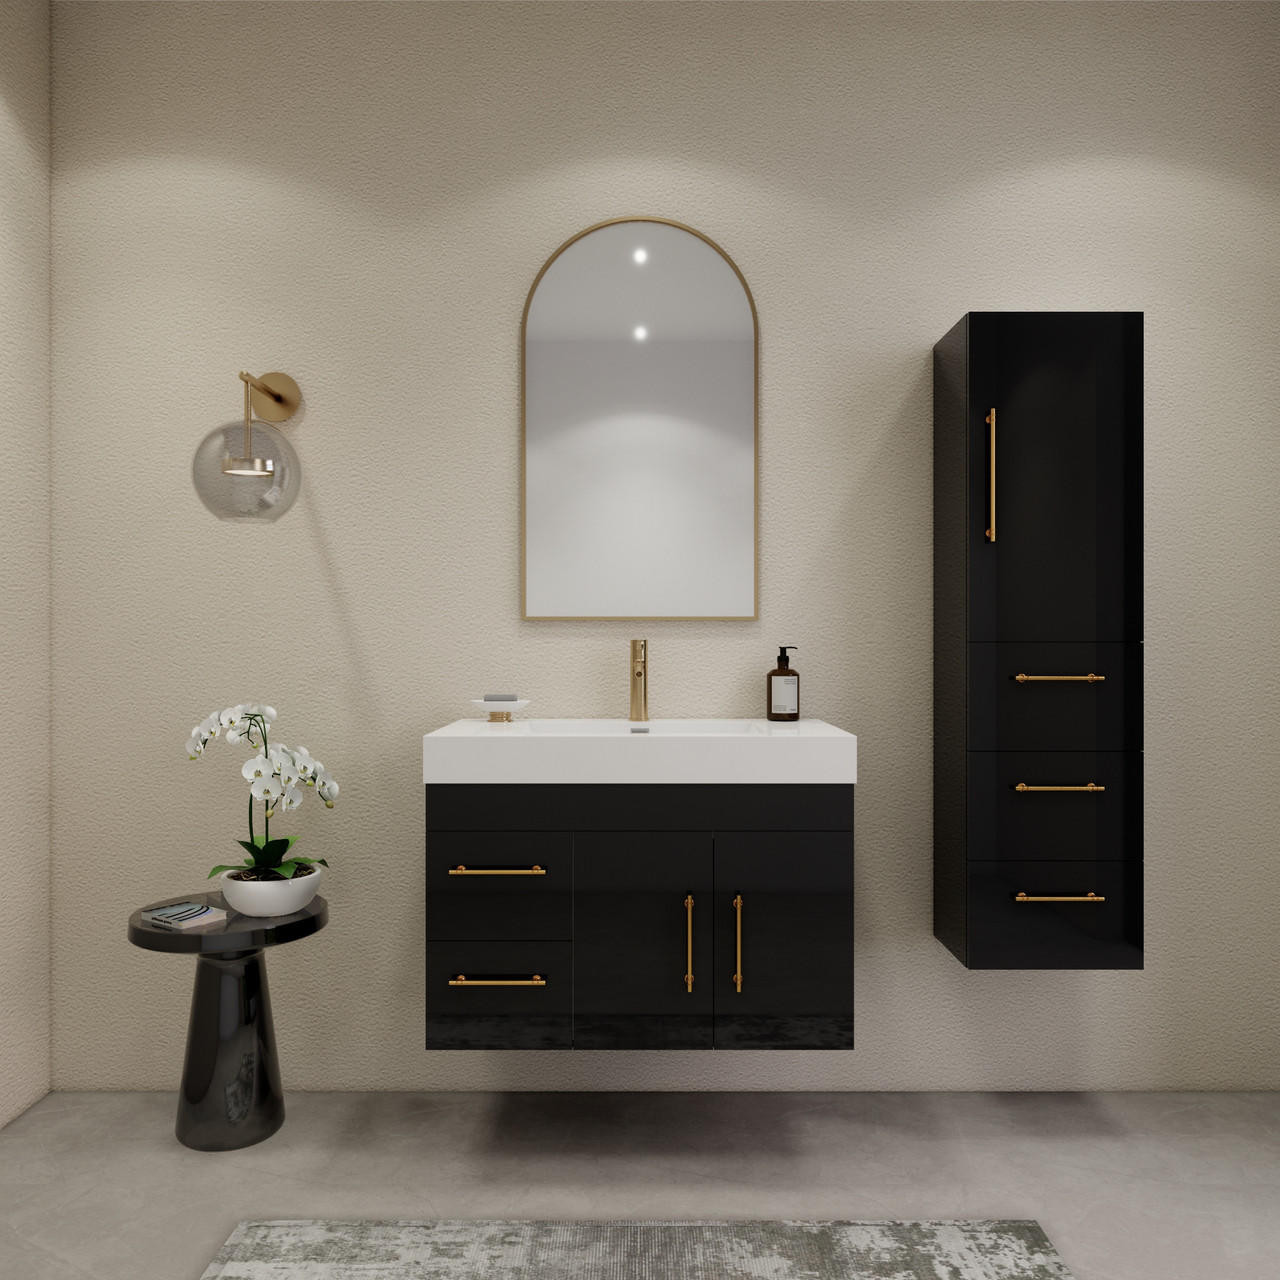 ELSA 36" WALL MOUNTED VANITY WITH REINFORCED ACRYLIC SINK (LEFT SIDE DRAWERS) in GLOSS BLACK